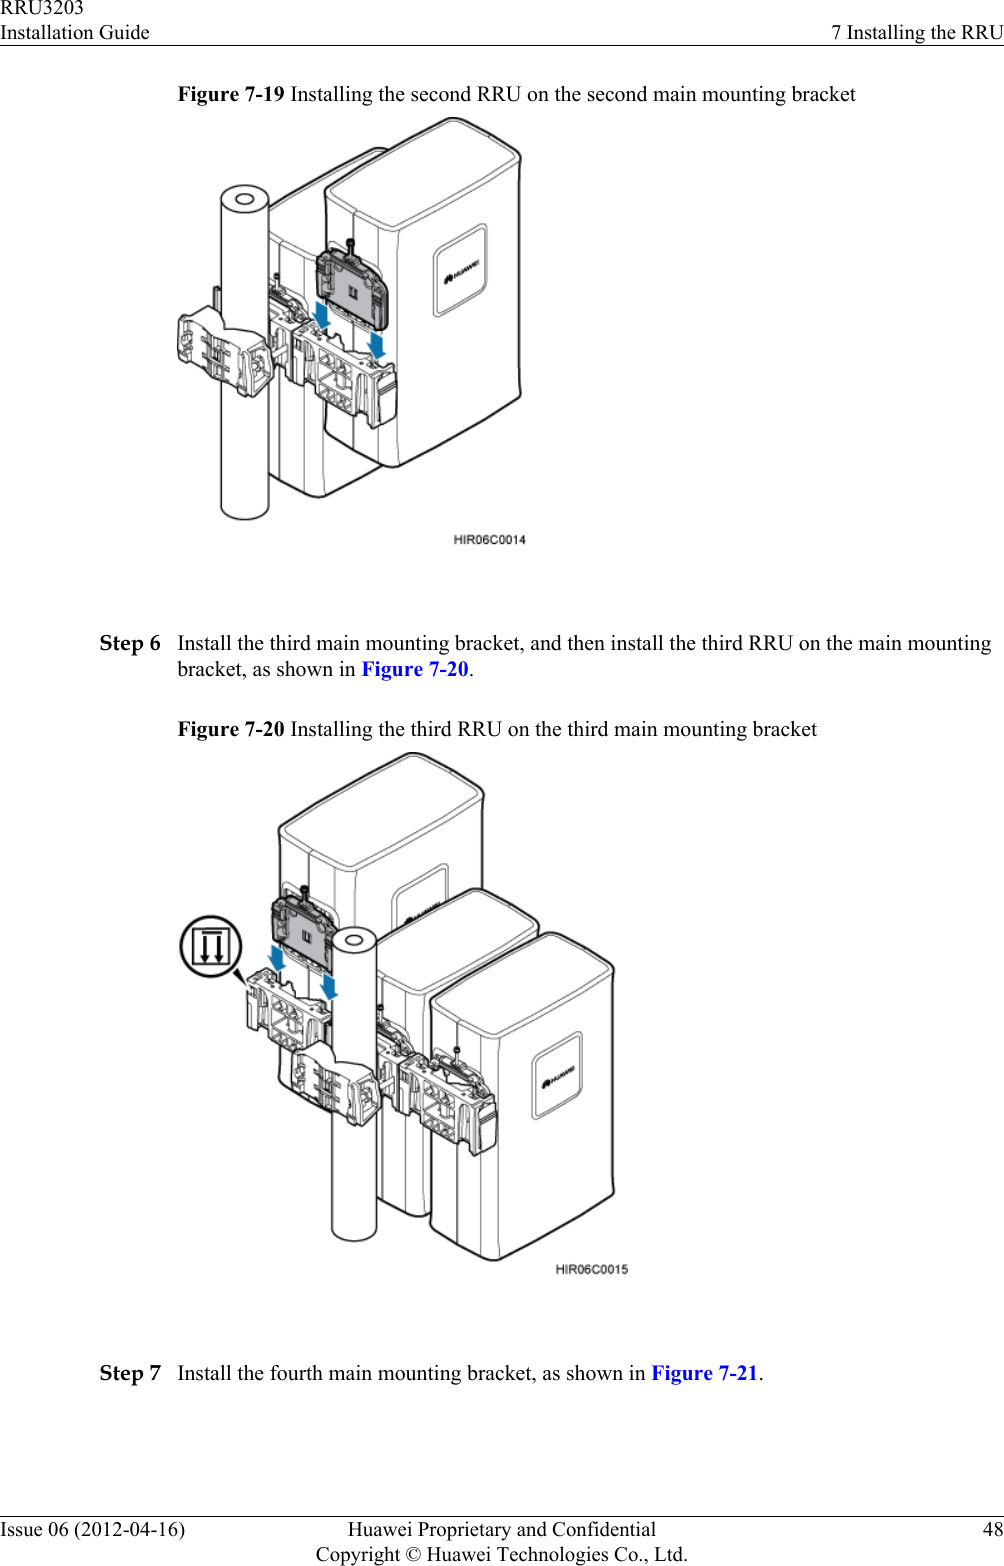 Figure 7-19 Installing the second RRU on the second main mounting bracket Step 6 Install the third main mounting bracket, and then install the third RRU on the main mountingbracket, as shown in Figure 7-20.Figure 7-20 Installing the third RRU on the third main mounting bracket Step 7 Install the fourth main mounting bracket, as shown in Figure 7-21.RRU3203Installation Guide 7 Installing the RRUIssue 06 (2012-04-16) Huawei Proprietary and ConfidentialCopyright © Huawei Technologies Co., Ltd.48